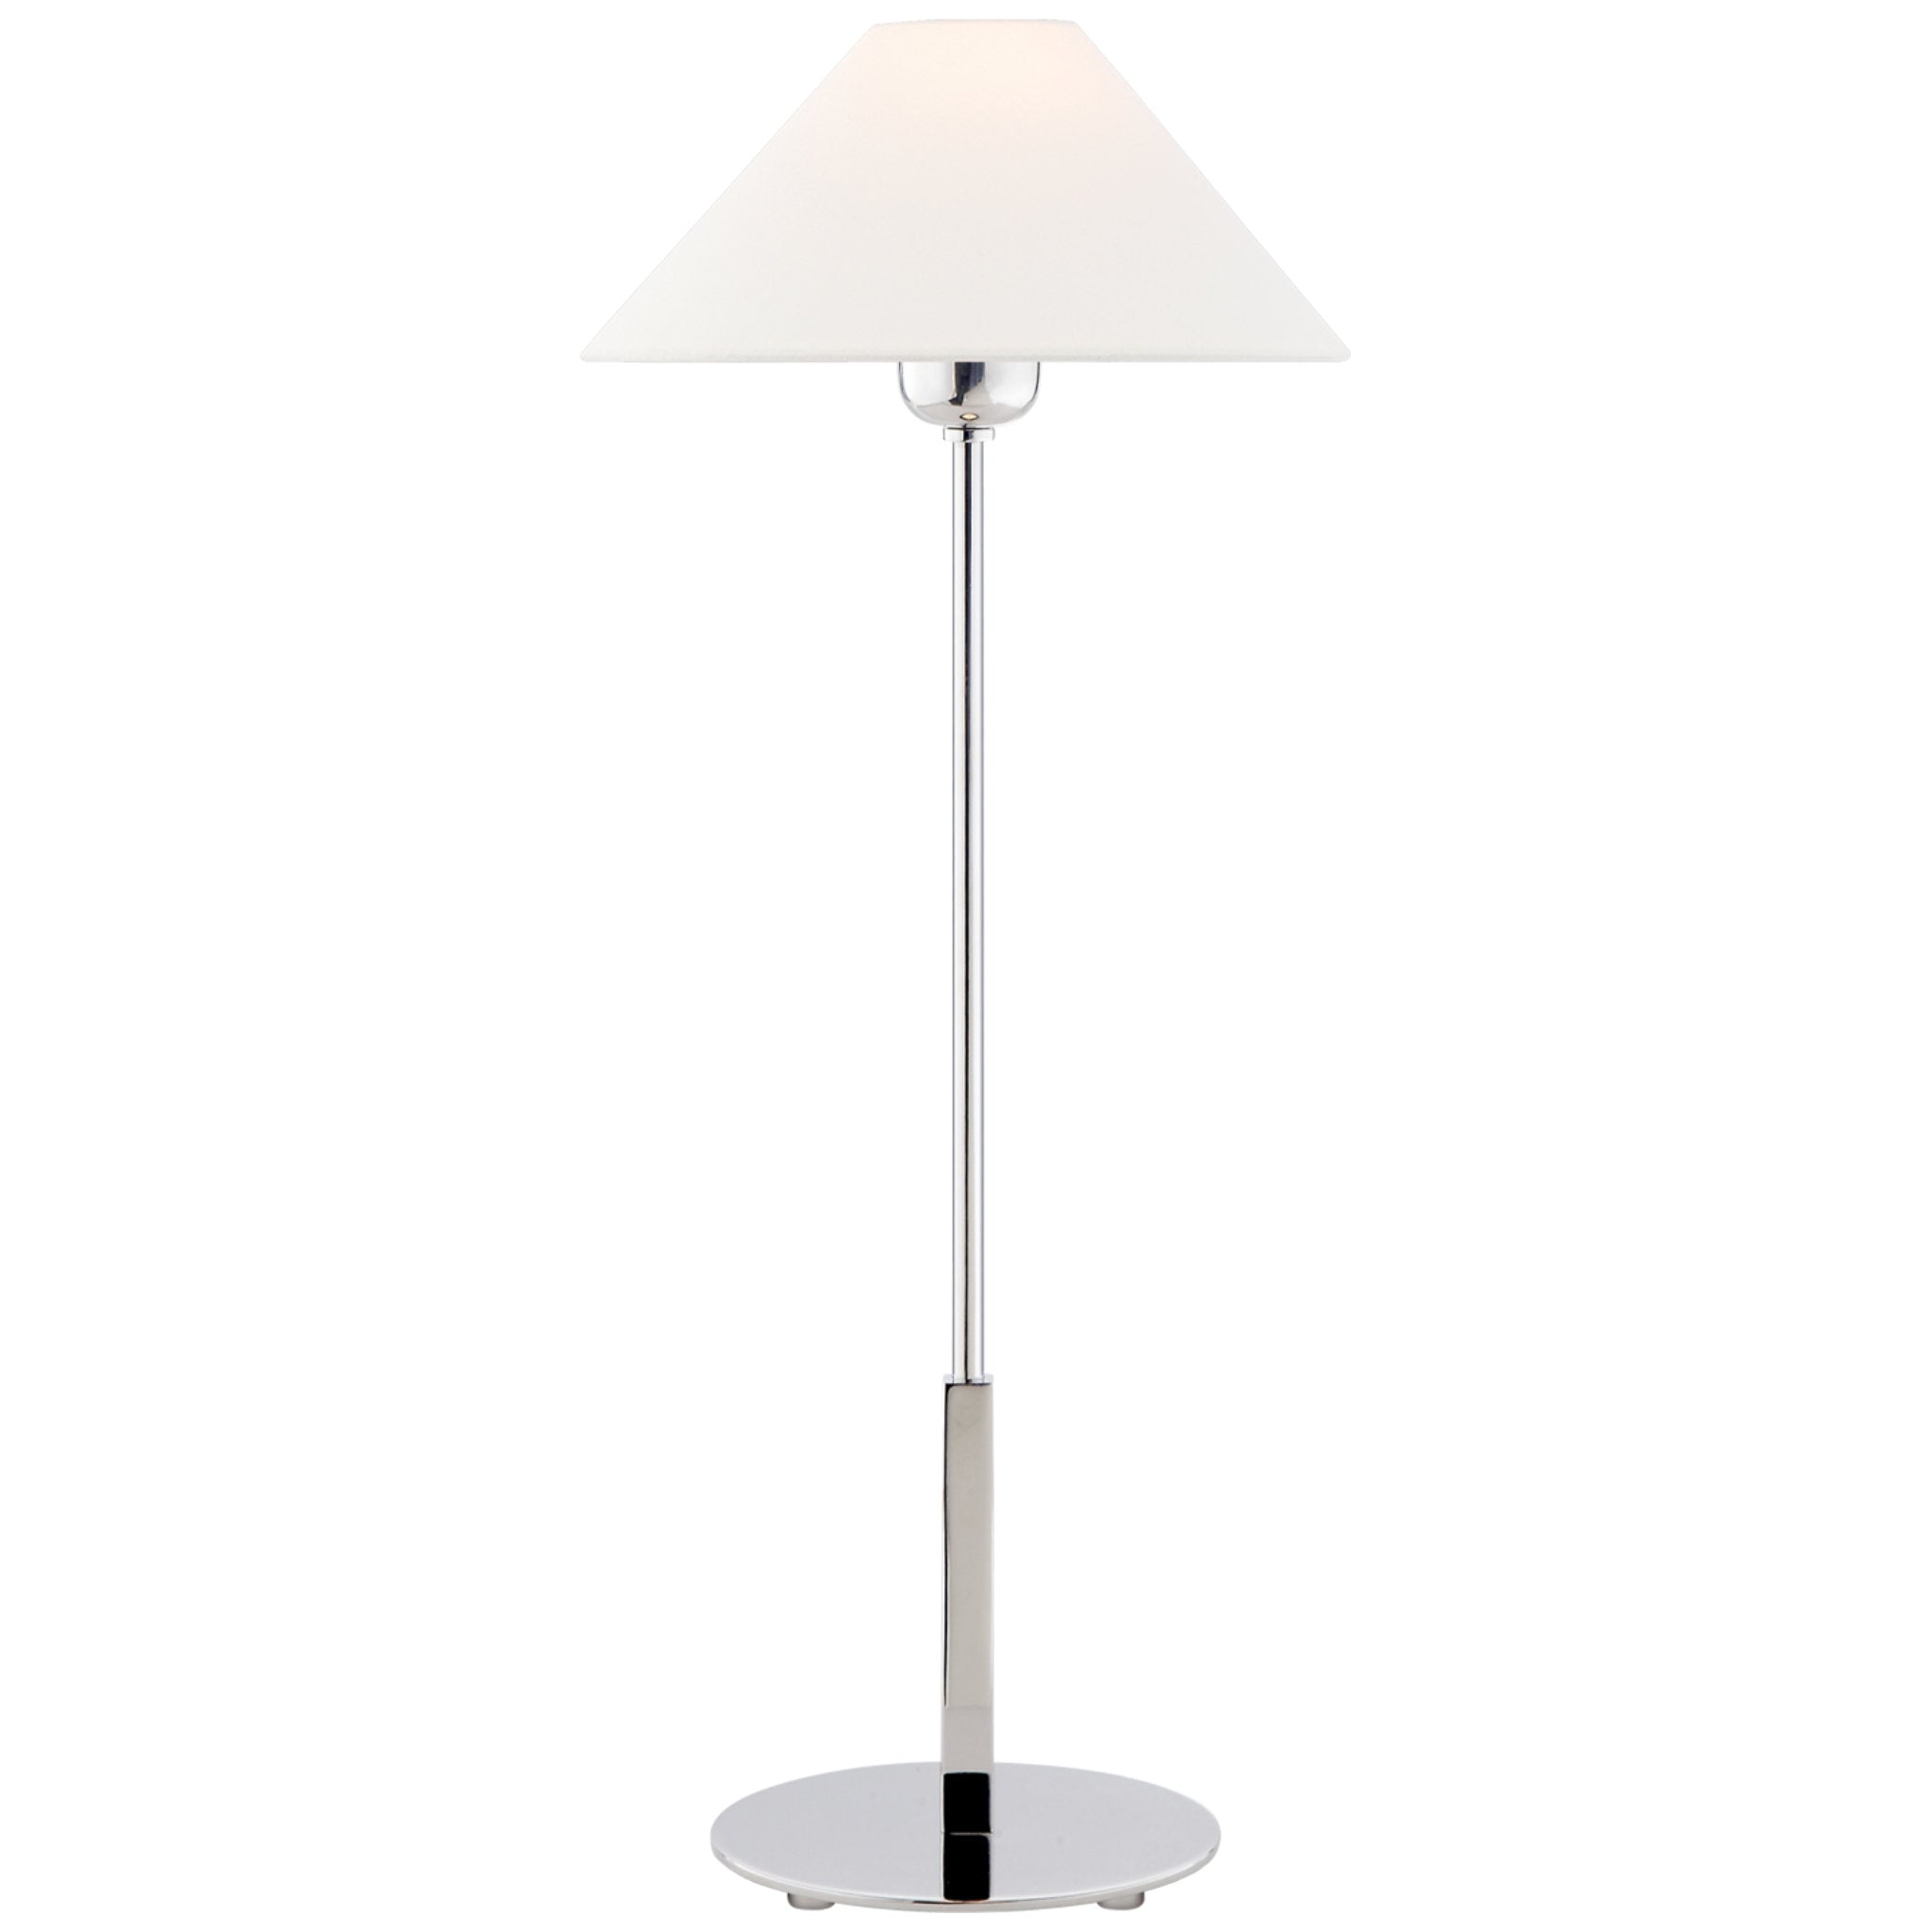 J. Randall Powers Hackney Table Lamp in Polished Nickel with Linen Shade